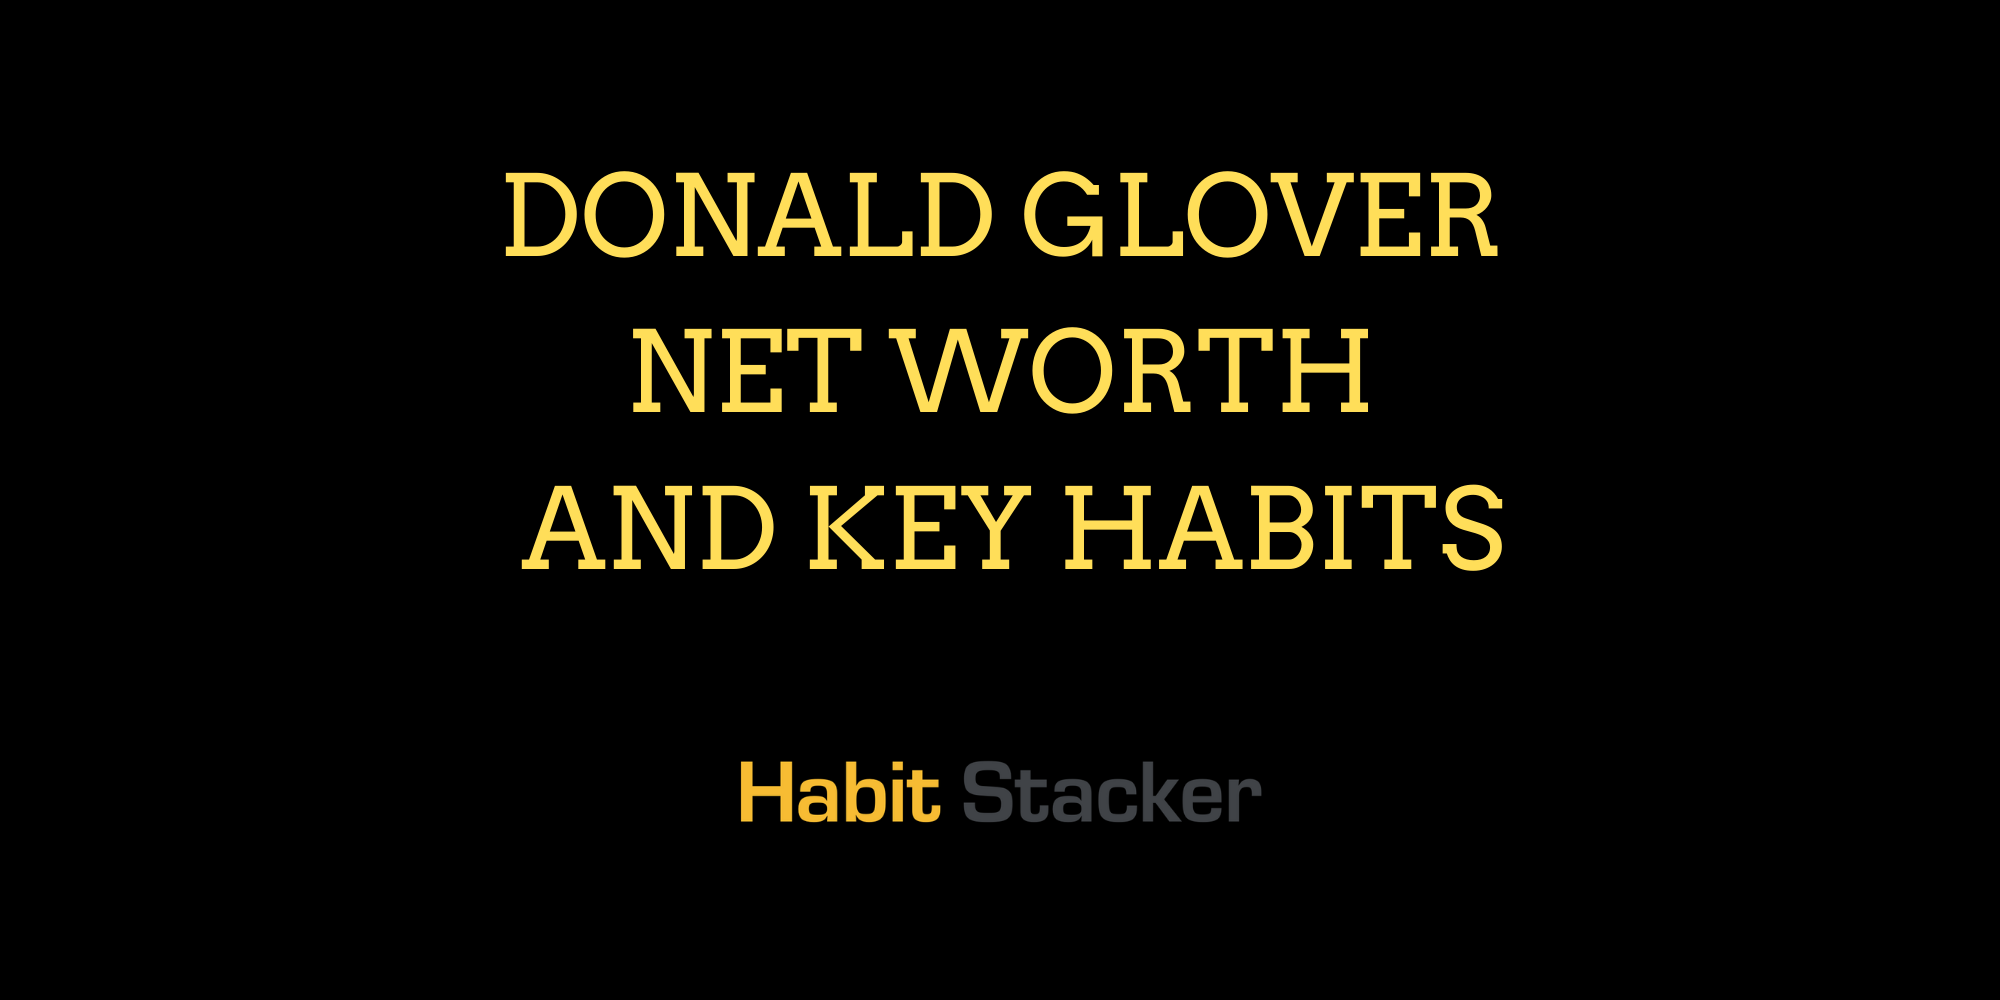 Donald Glover Net Worth and Key Habits